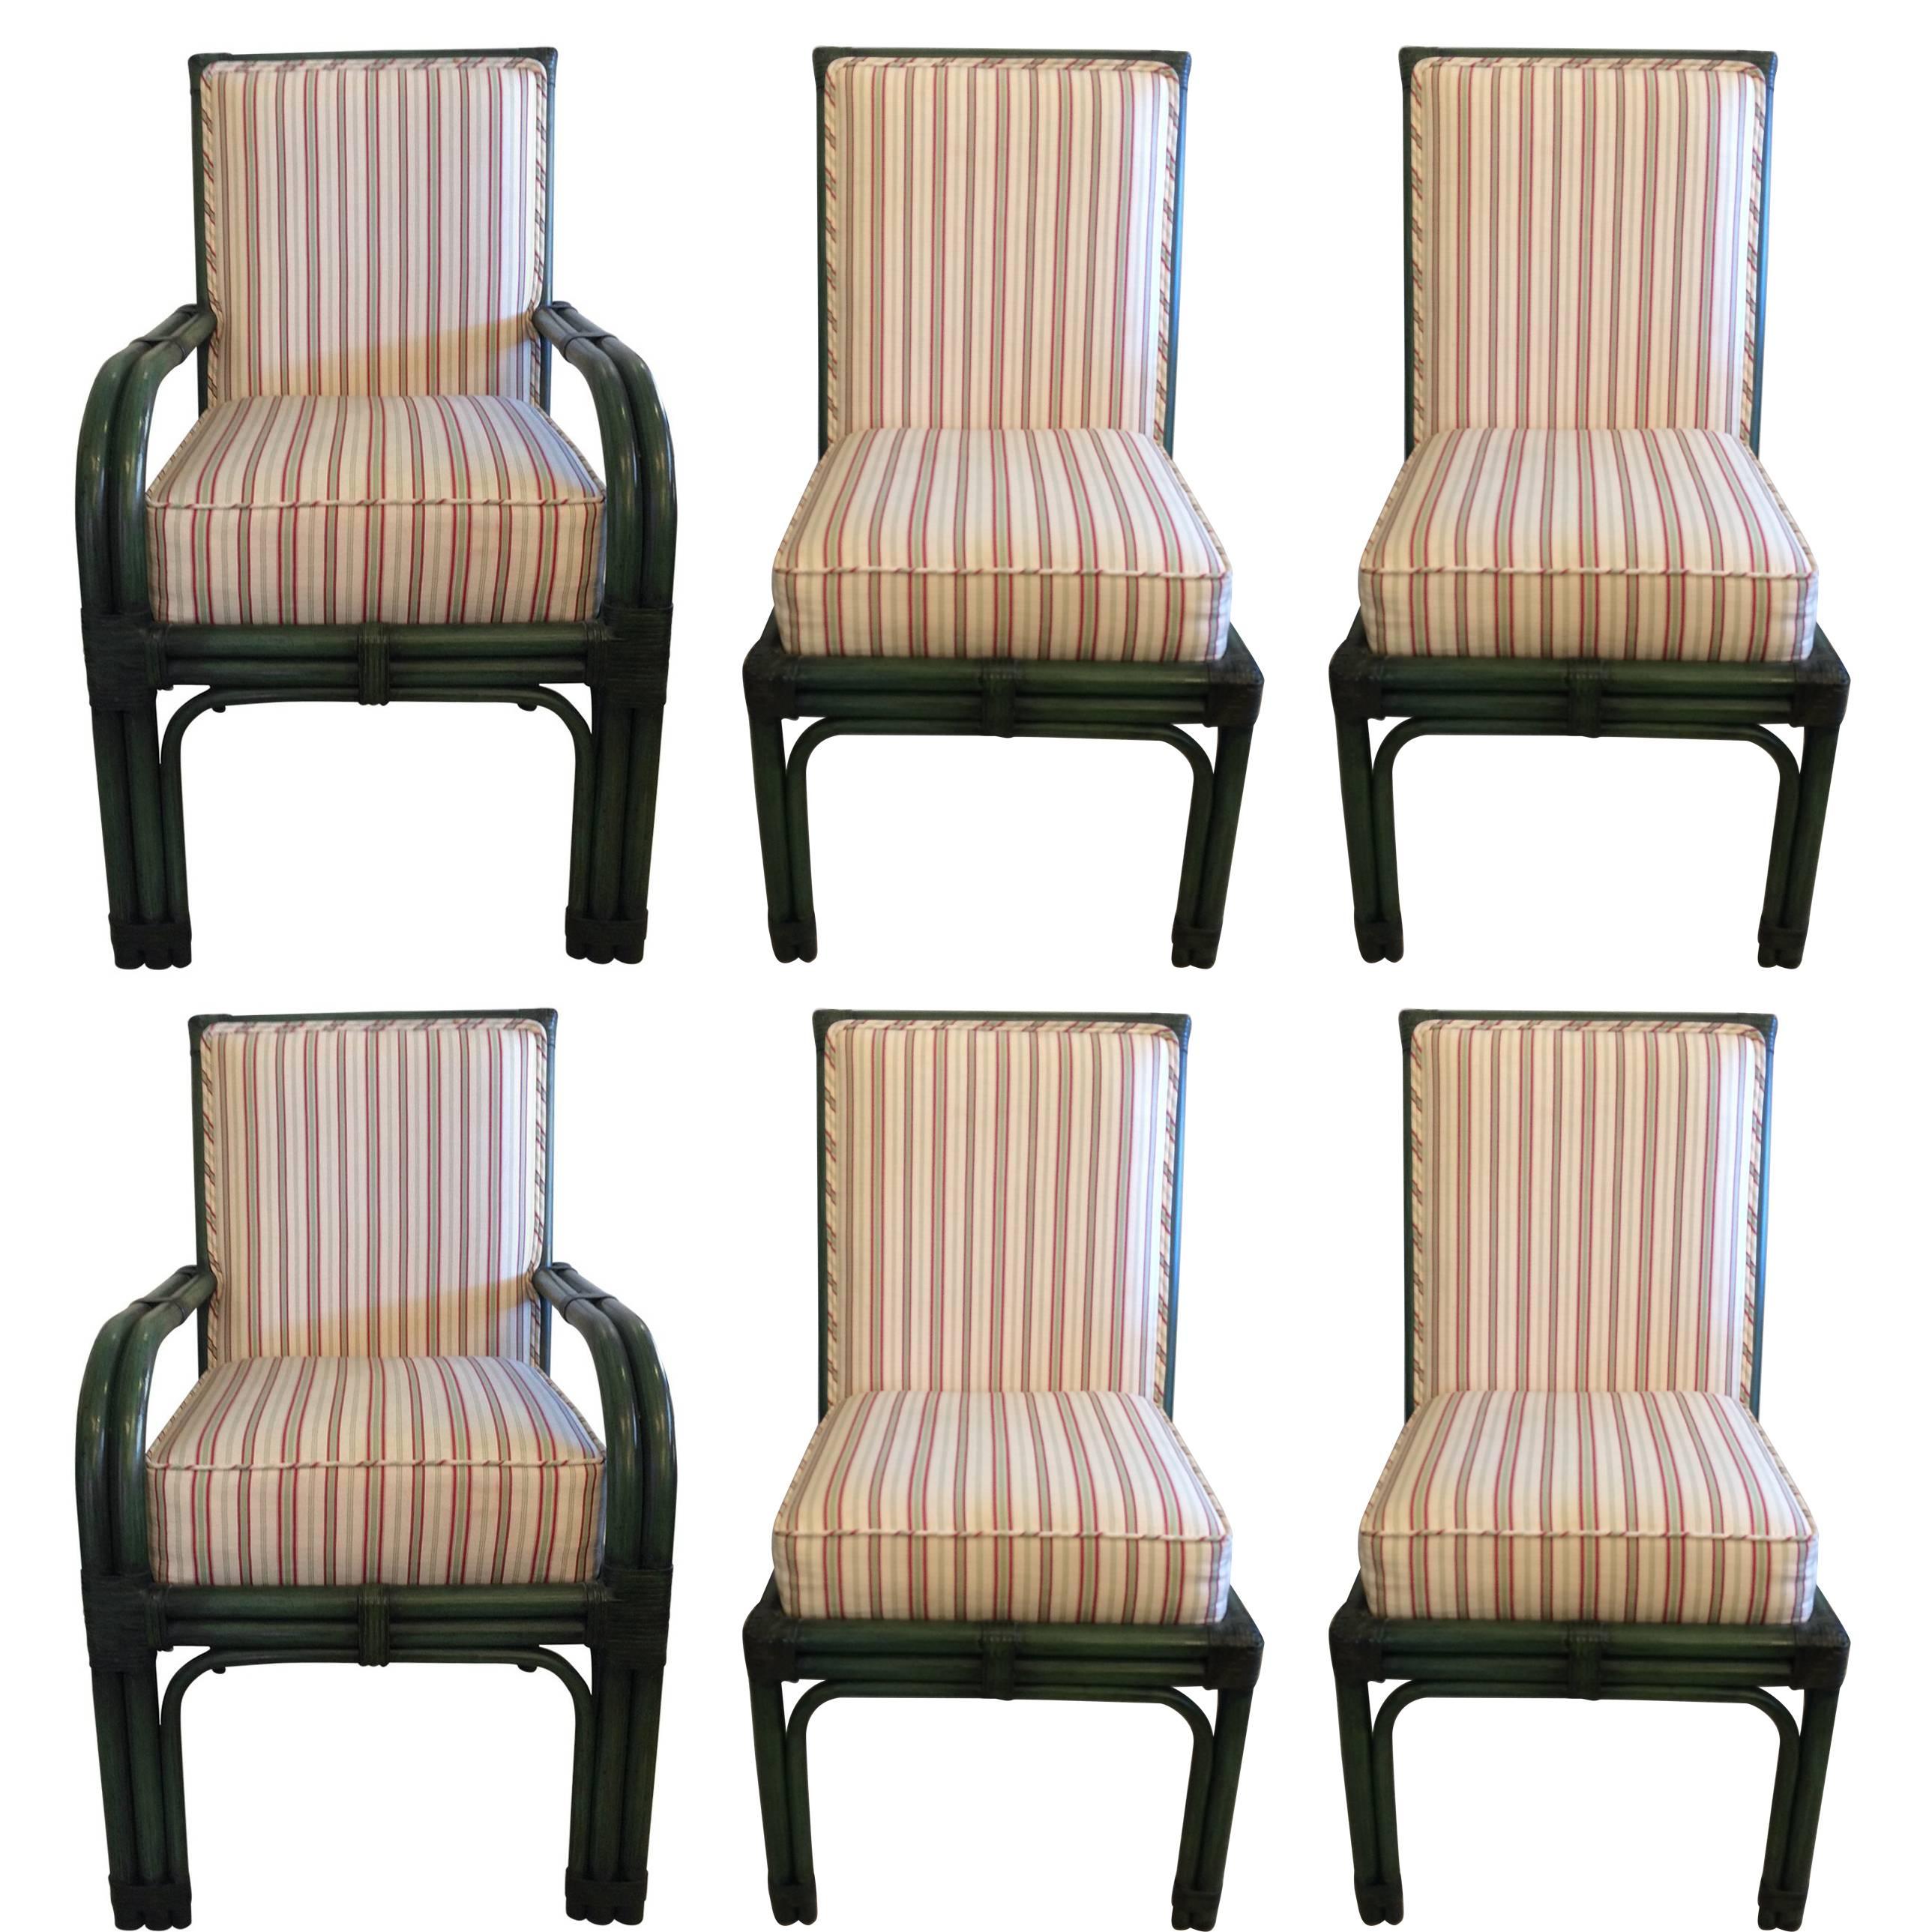 Set of Six Painted Green Bamboo Dining Chairs with Comfy Striped Upholstery